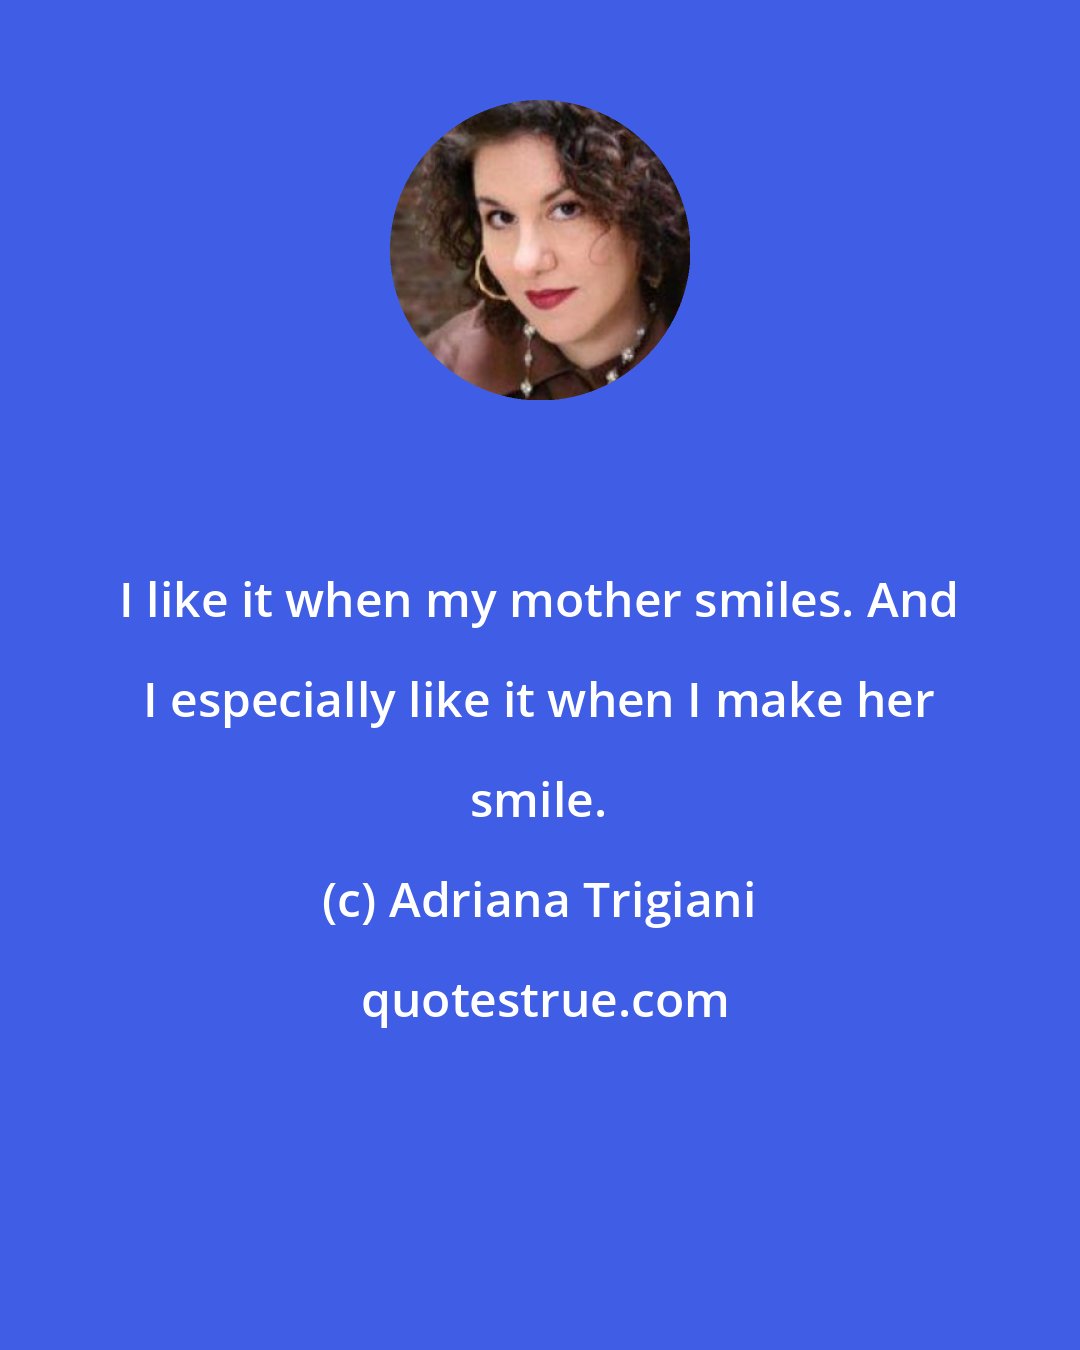 Adriana Trigiani: I like it when my mother smiles. And I especially like it when I make her smile.